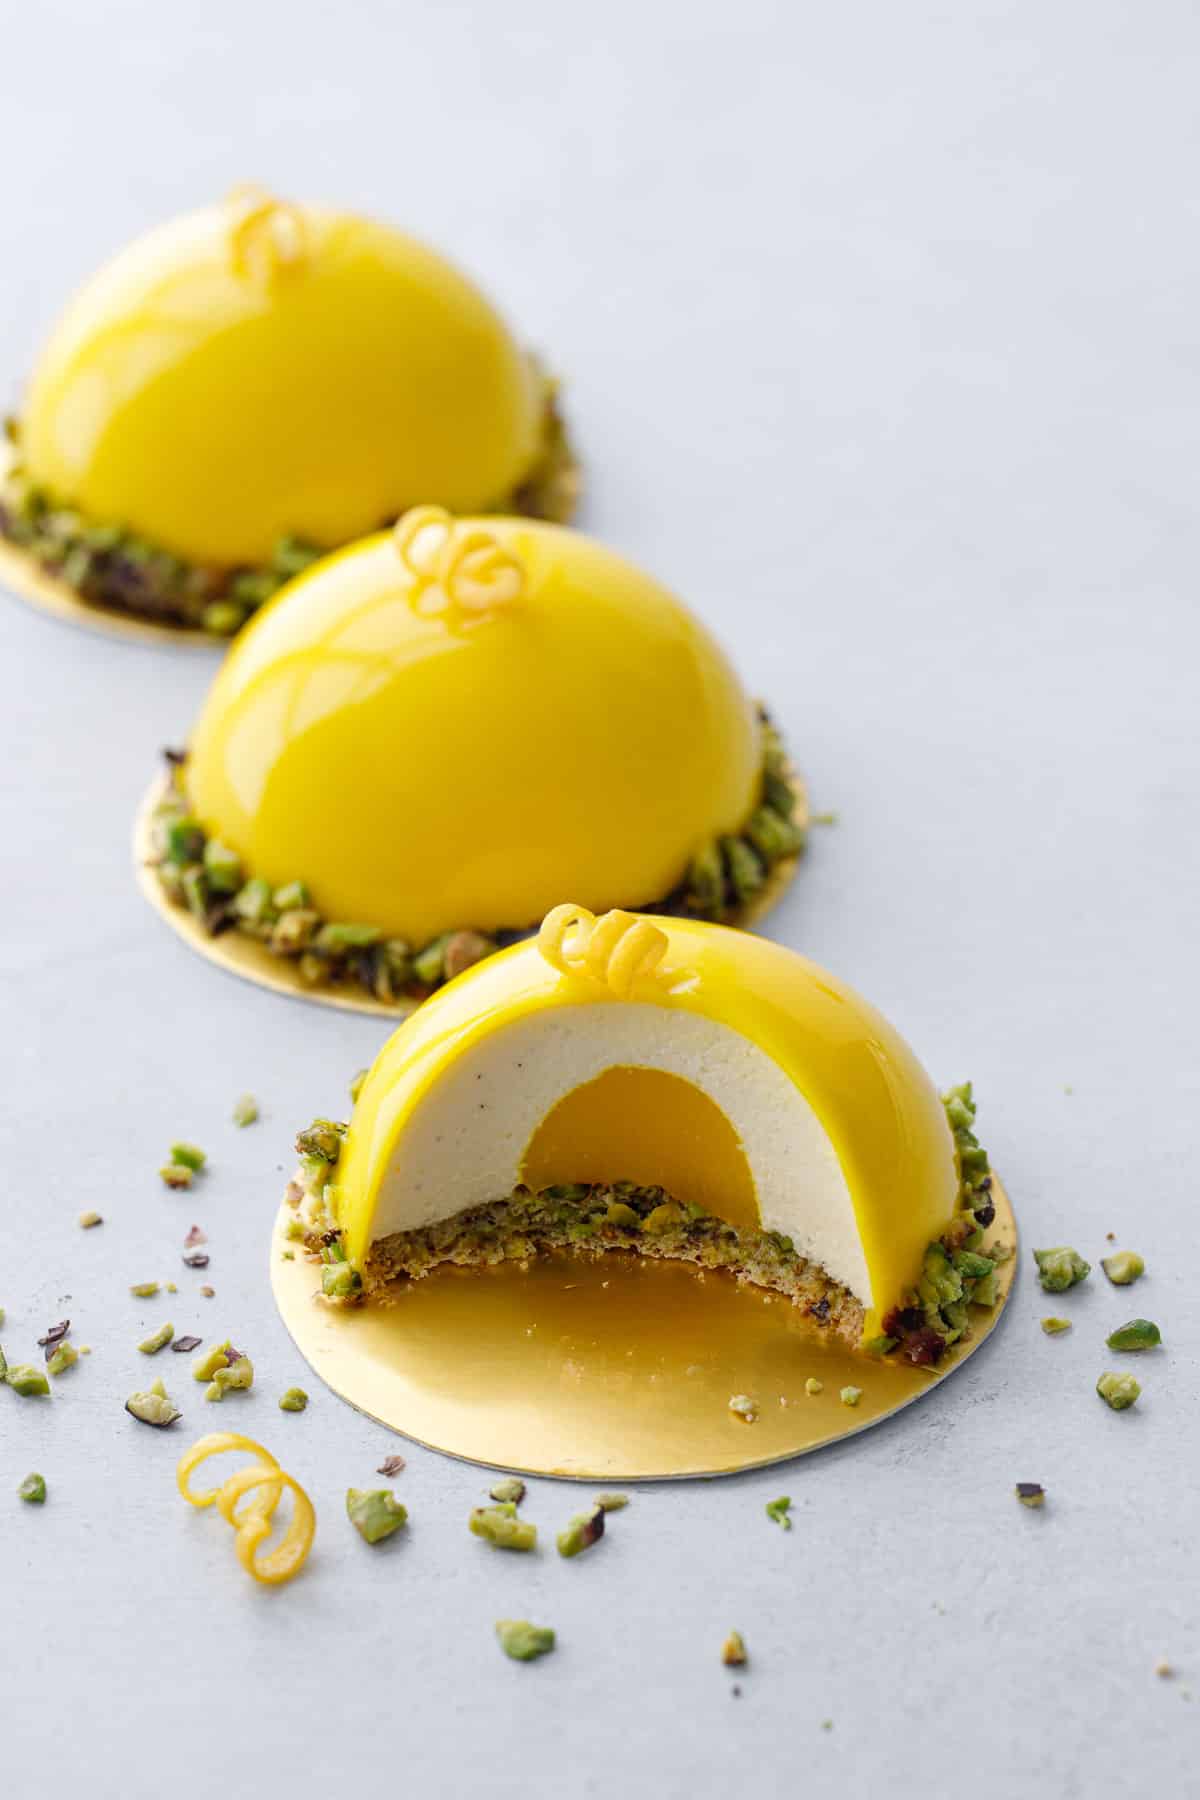 Three Pistachio & Meyer Lemon Mousse Cakes in a row on a gray background, one cut to show the lemon curd center and pistachio dacquoise base.